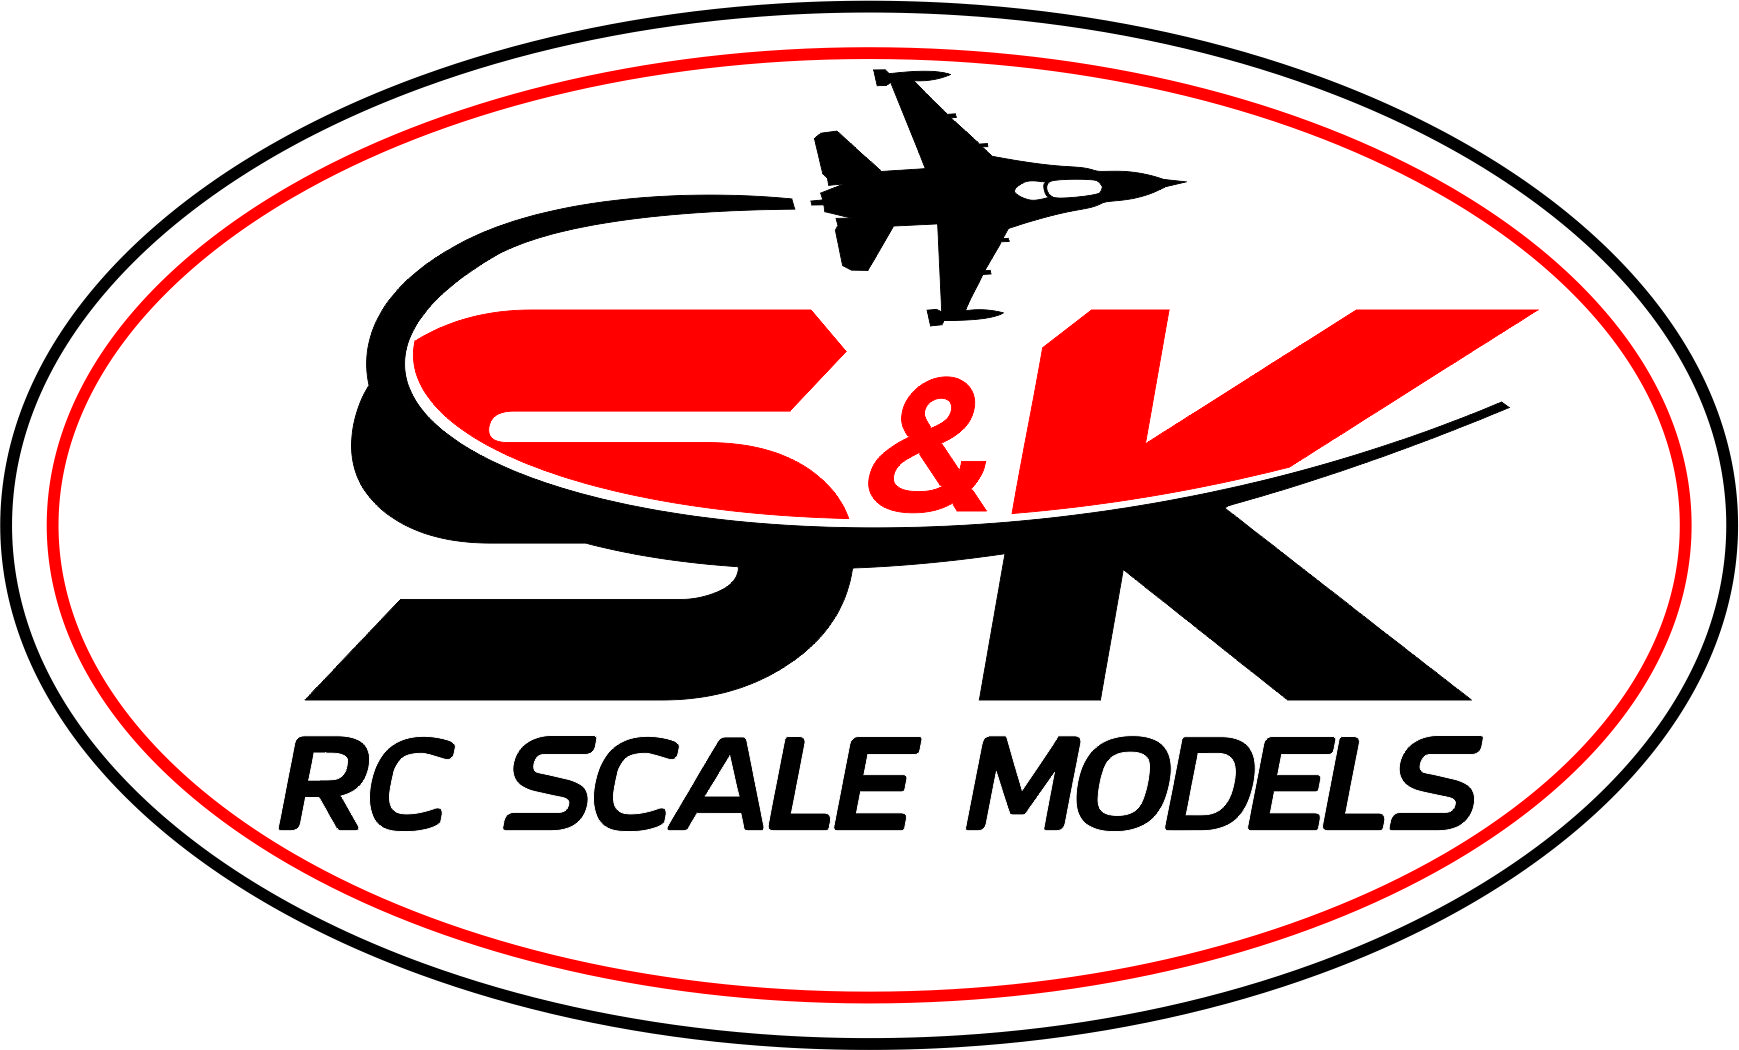 S&K RC-Scale Models